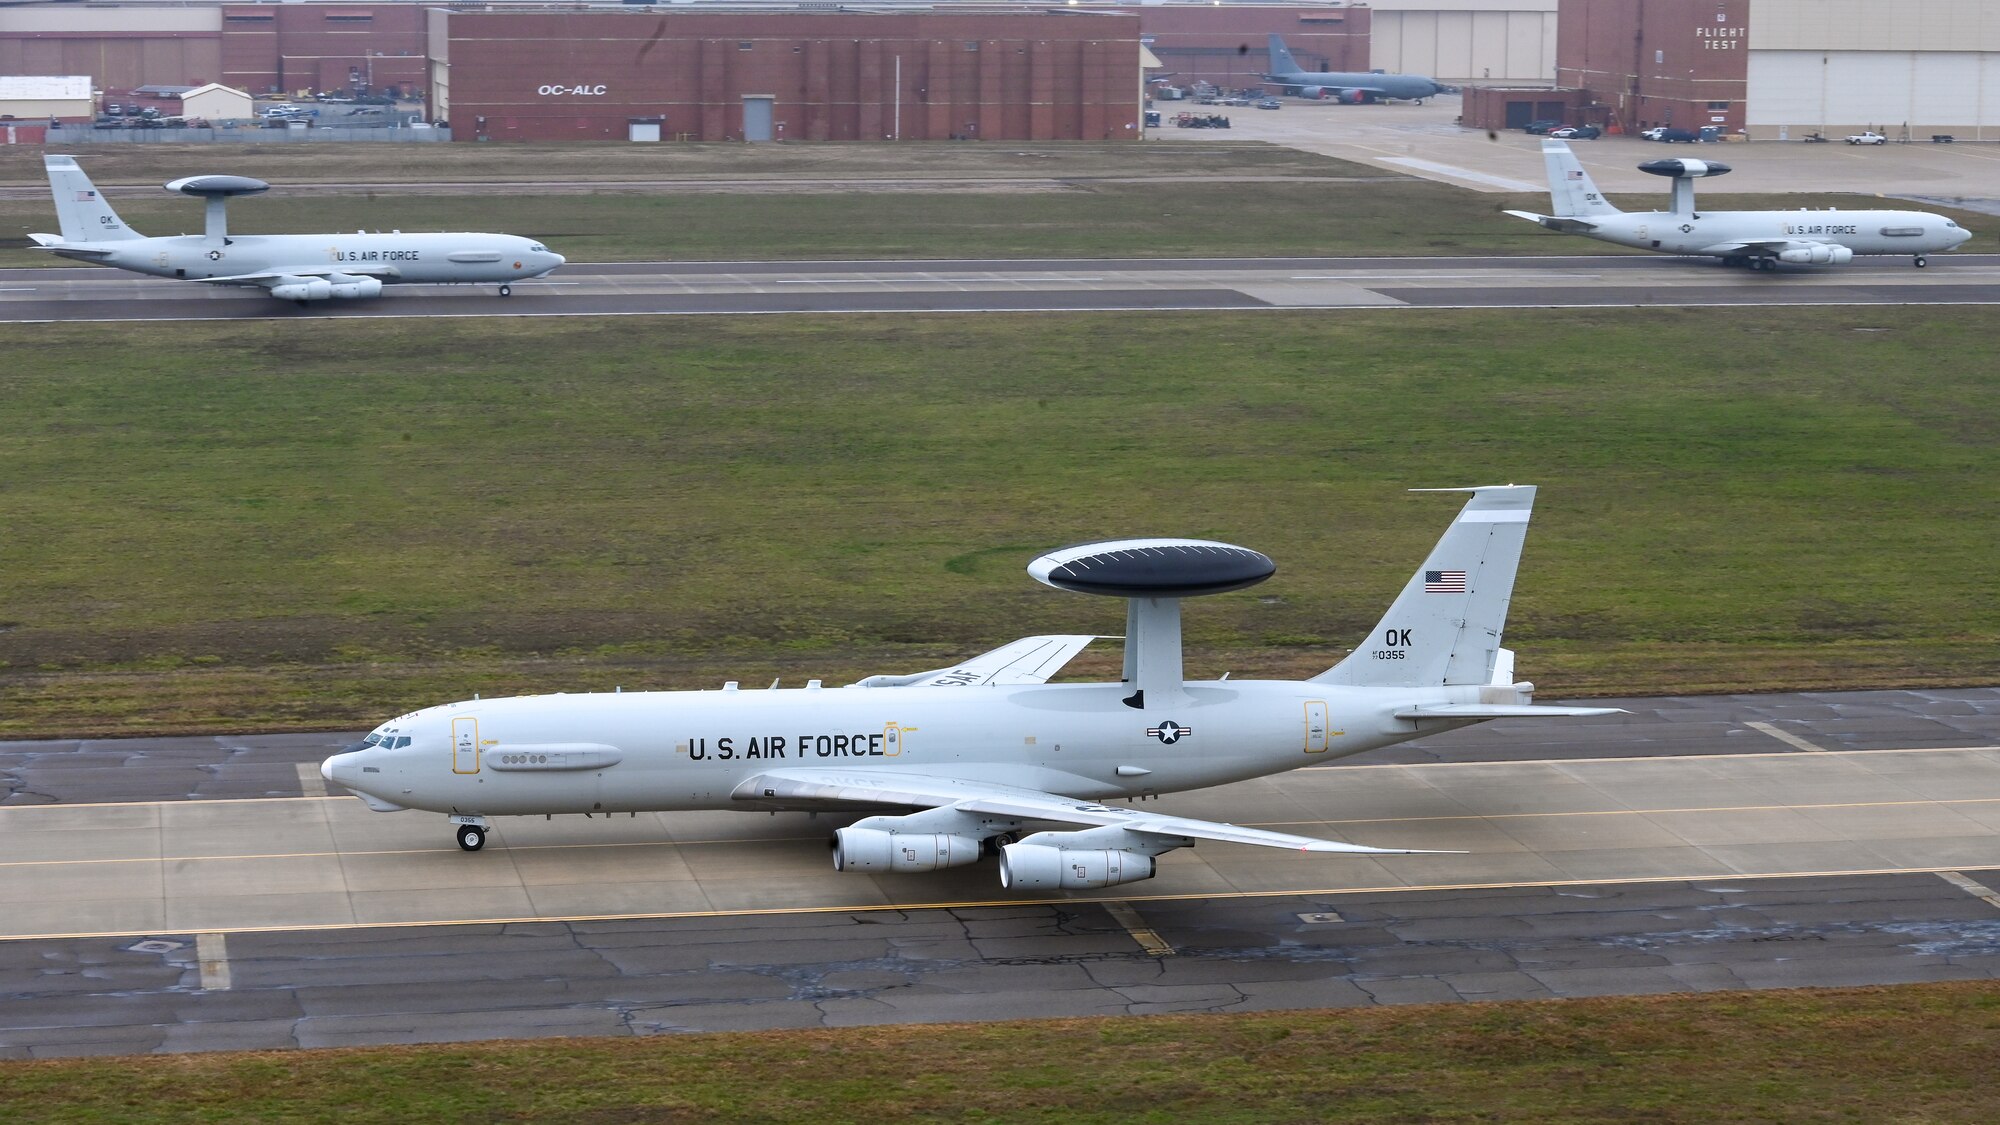 One E-3 Sentry aircraft on taxiway and two 3-E Sentry aircraft on the runway.